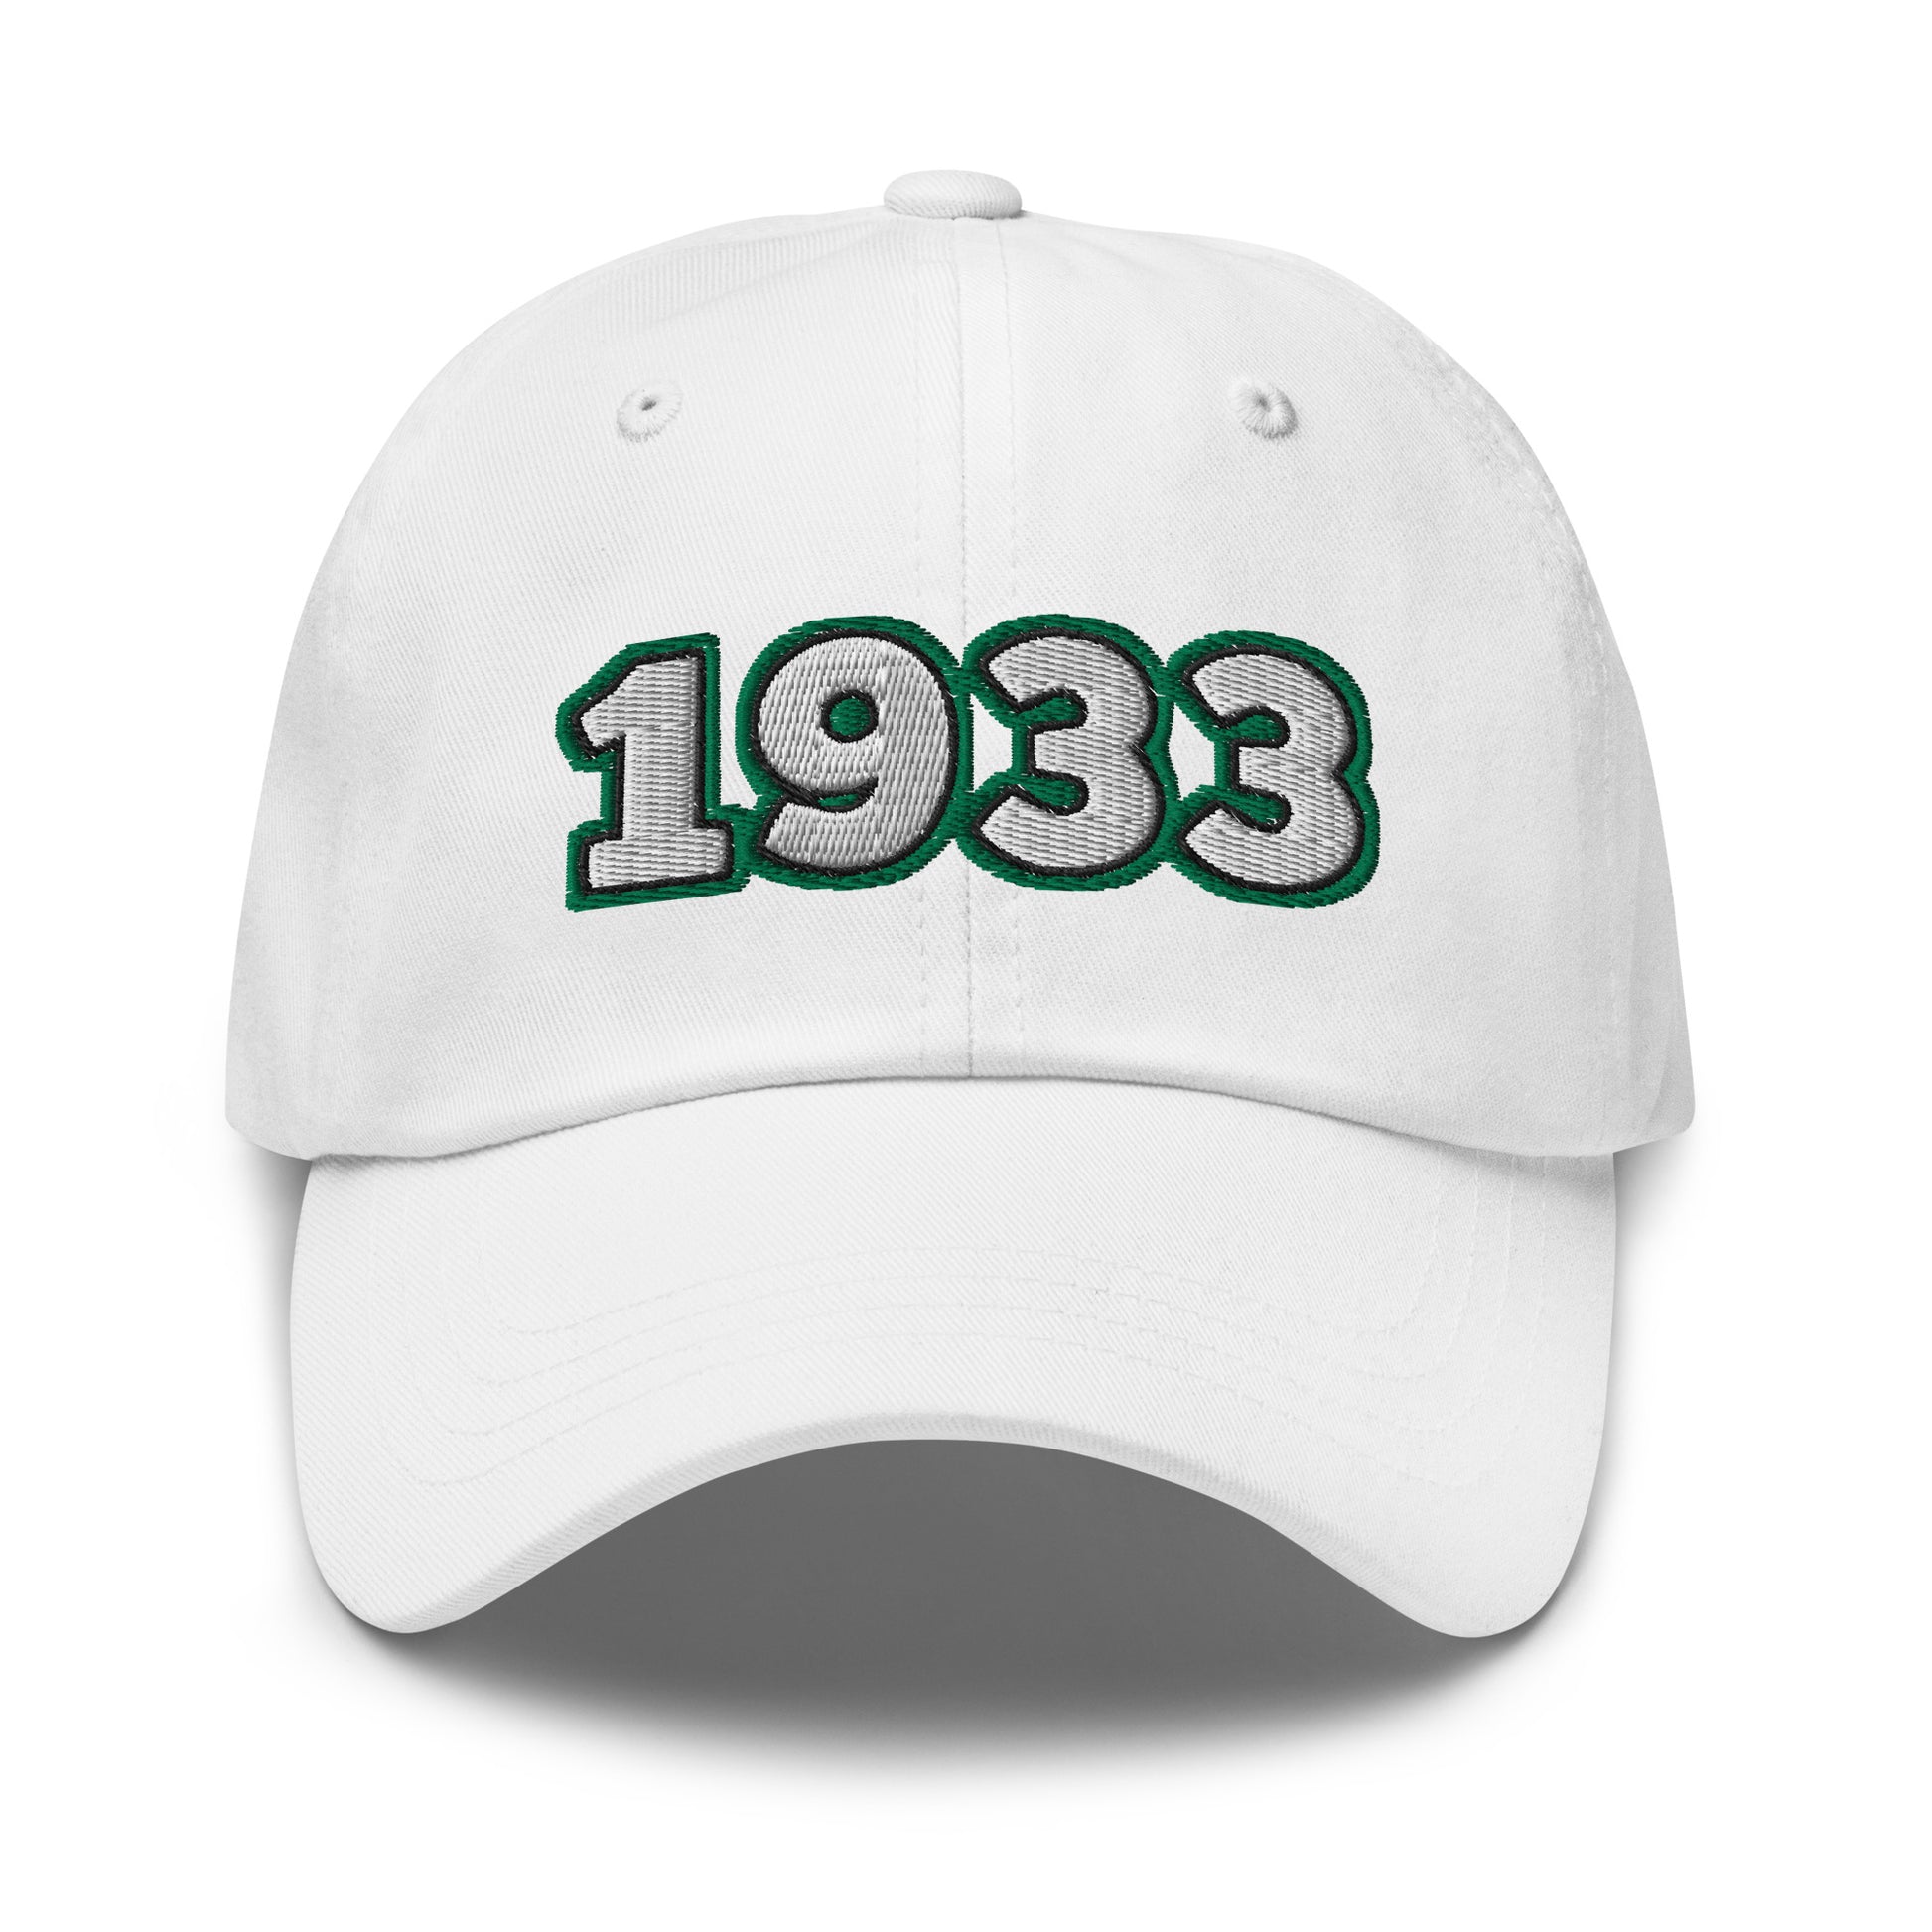 Eagles Champions Hat / 1933 Hat / Eagles Champs Dad Hat White